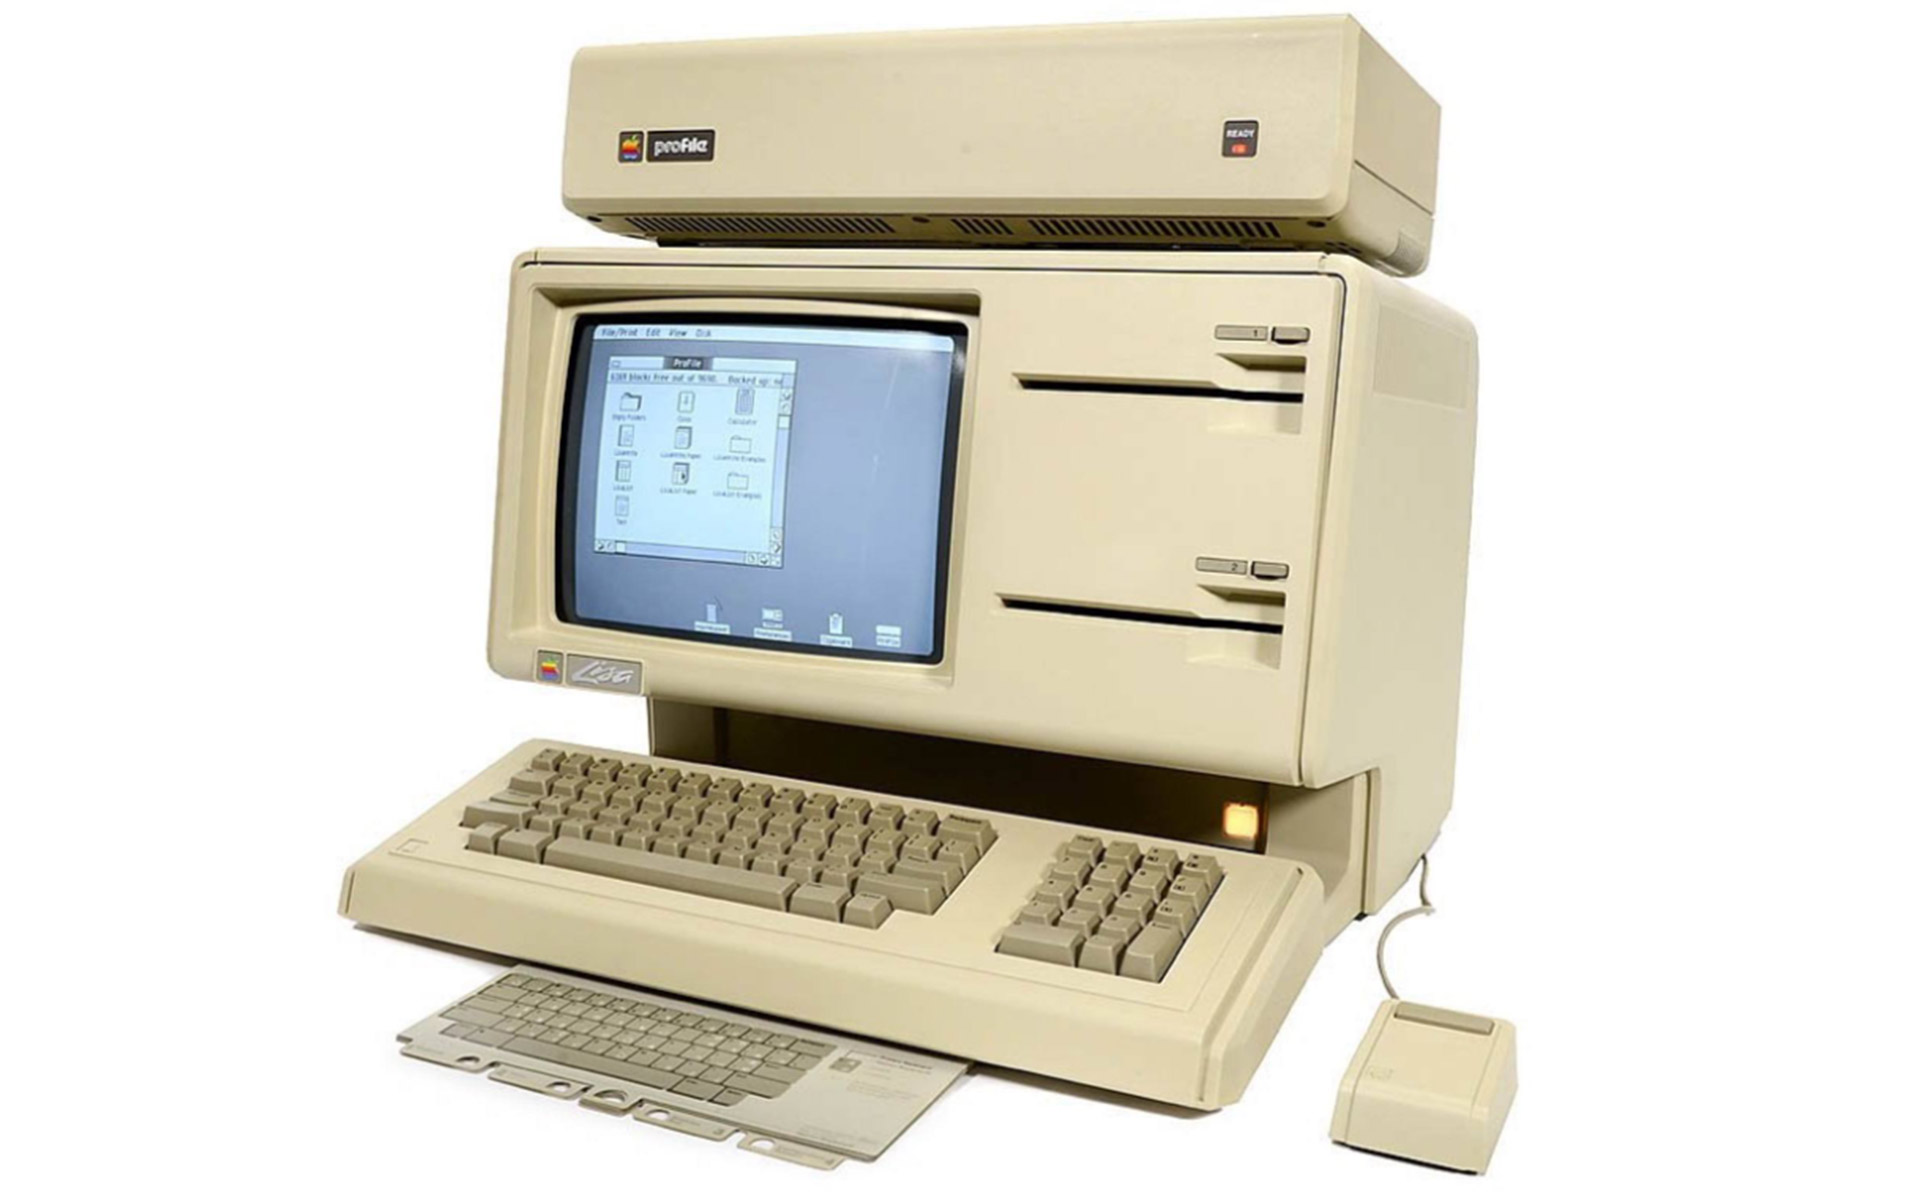 Apple Lisa is an old Apple product along with accessories